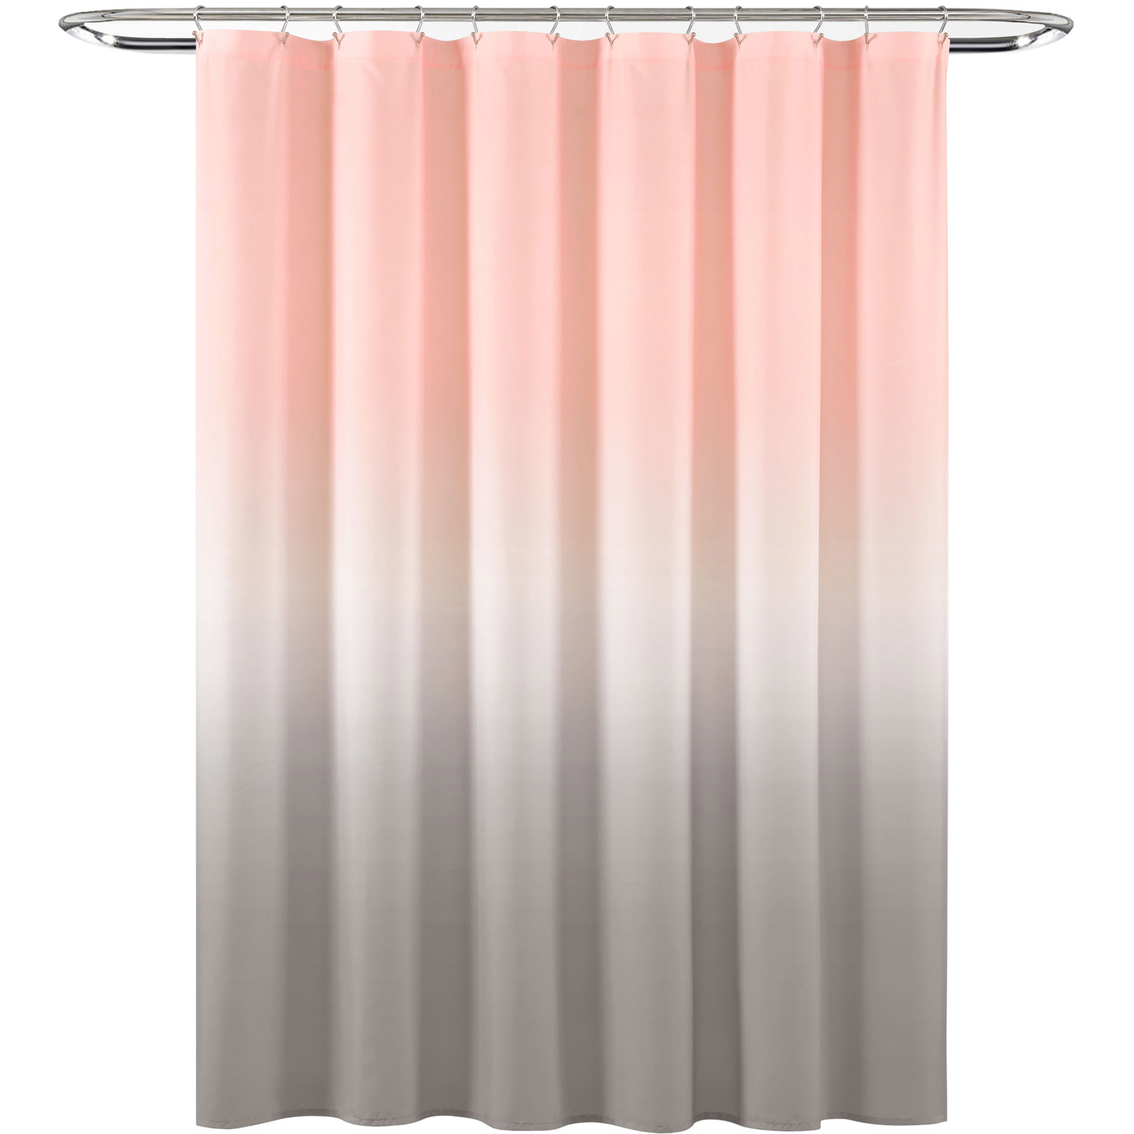 Lush Decor Ombre Fiesta Shower Curtain 72 x 72 - Image 7 of 8